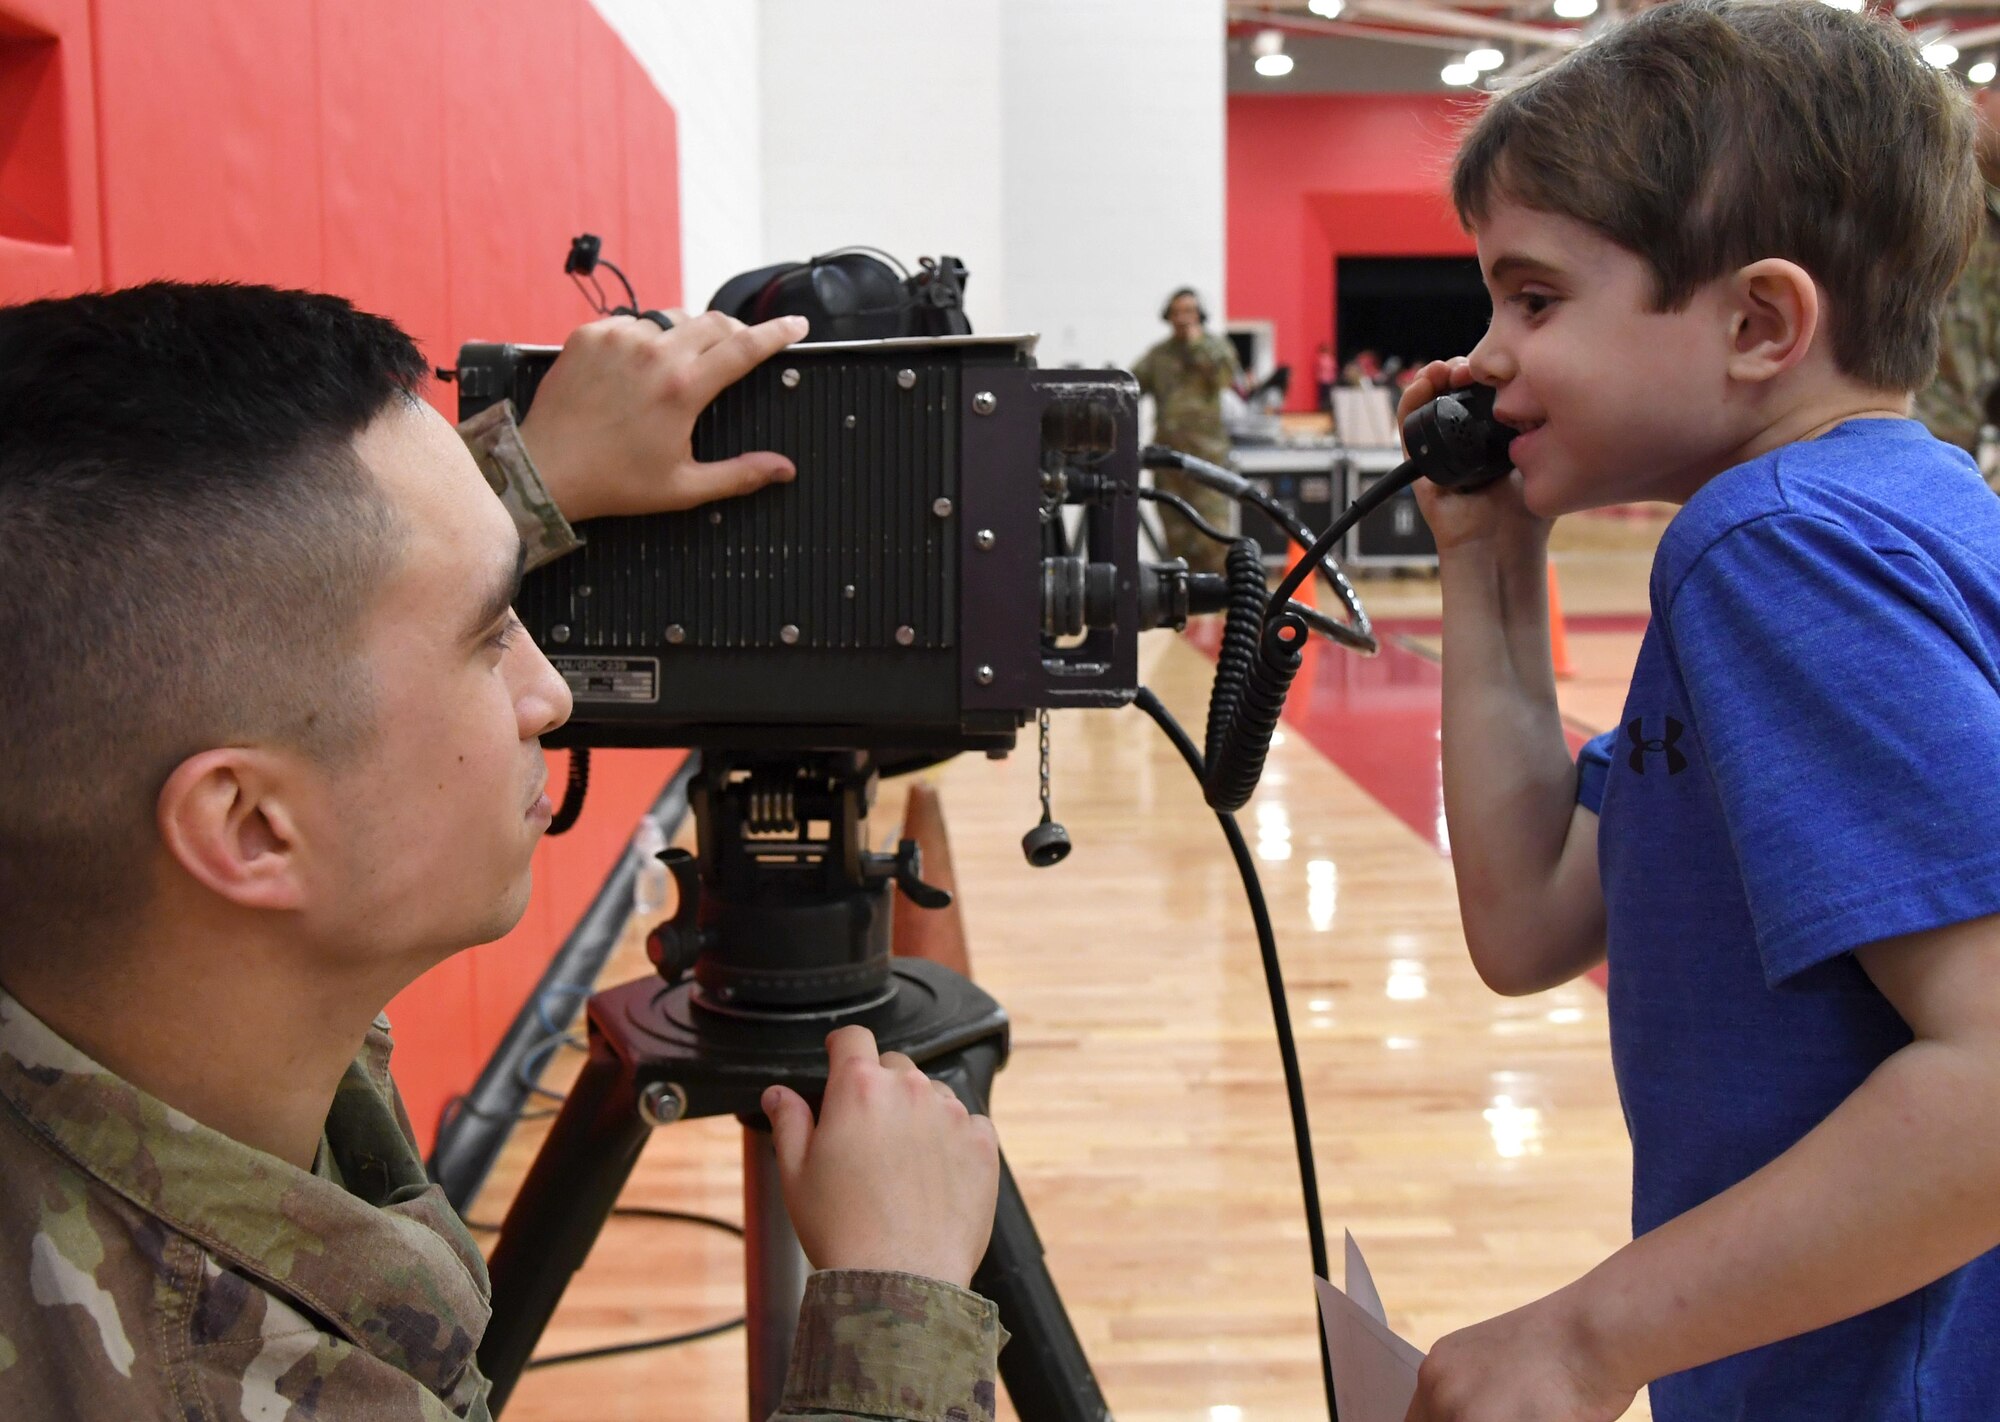 U.S. Air Force Tech. Sgt. John Hoefler, 338th Training Squadron instructor, provides Elijah Foley, North Bay Elementary School student, with a radio frequency communications demonstration during the Biloxi Science, Technology, Engineering and Mathematics Night at the Biloxi Junior High School gymnasium, Biloxi, Mississippi, Feb. 11, 2020. The entire Biloxi school district was invited to the event which promoted STEM. Seven career fields from Keesler's 81st Training Wing and the 81st Training Group participated in the event. (U.S. Air Force photo by Kemberly Groue)